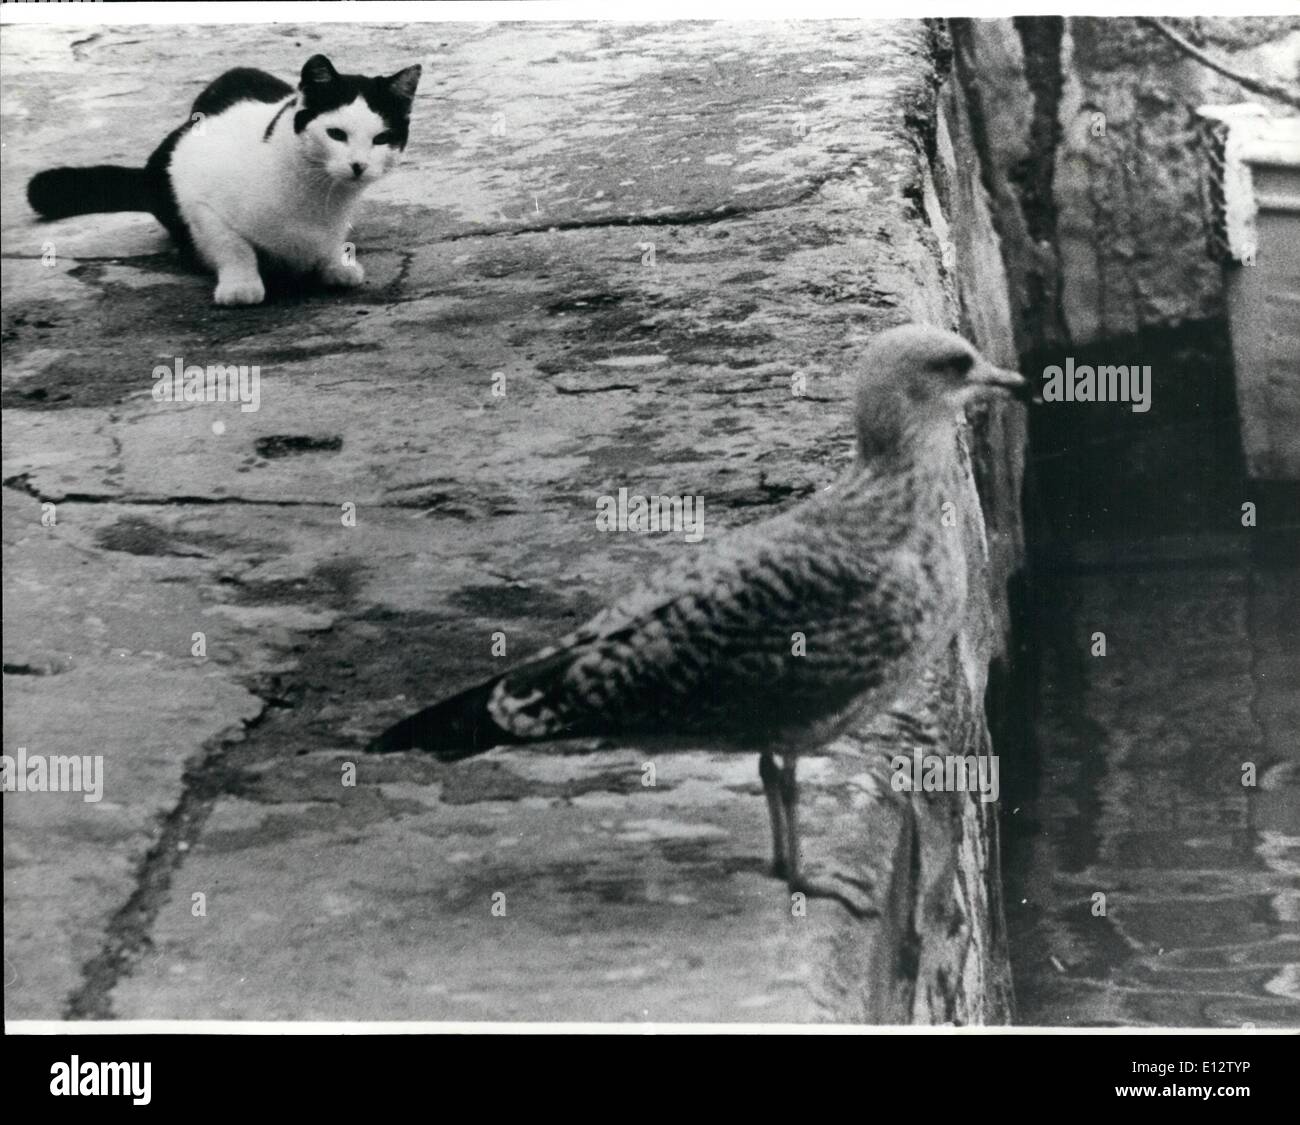 Feb. 25, 2012 - Tempting; You can bet that the seagull is fully aware of the cat who looks ready to pounce and the odds are that the gull got away first. A scene on the front at Movagissy, Cornwall. Stock Photo